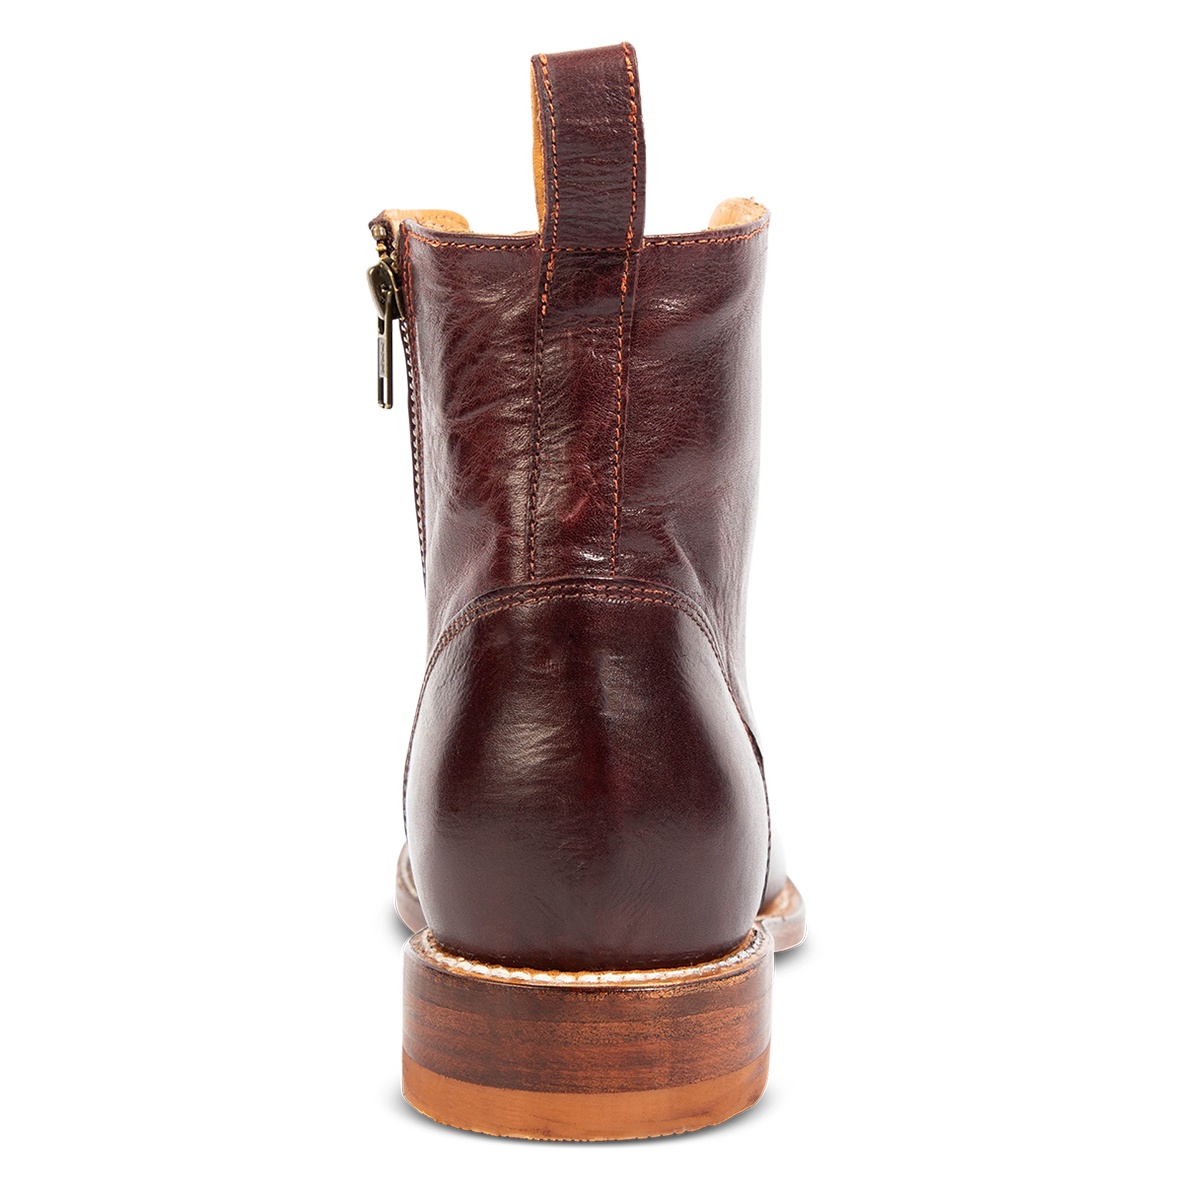 Back view showing leather pull strap and low block heel on FREEBIRD men's Porter wine leather boot